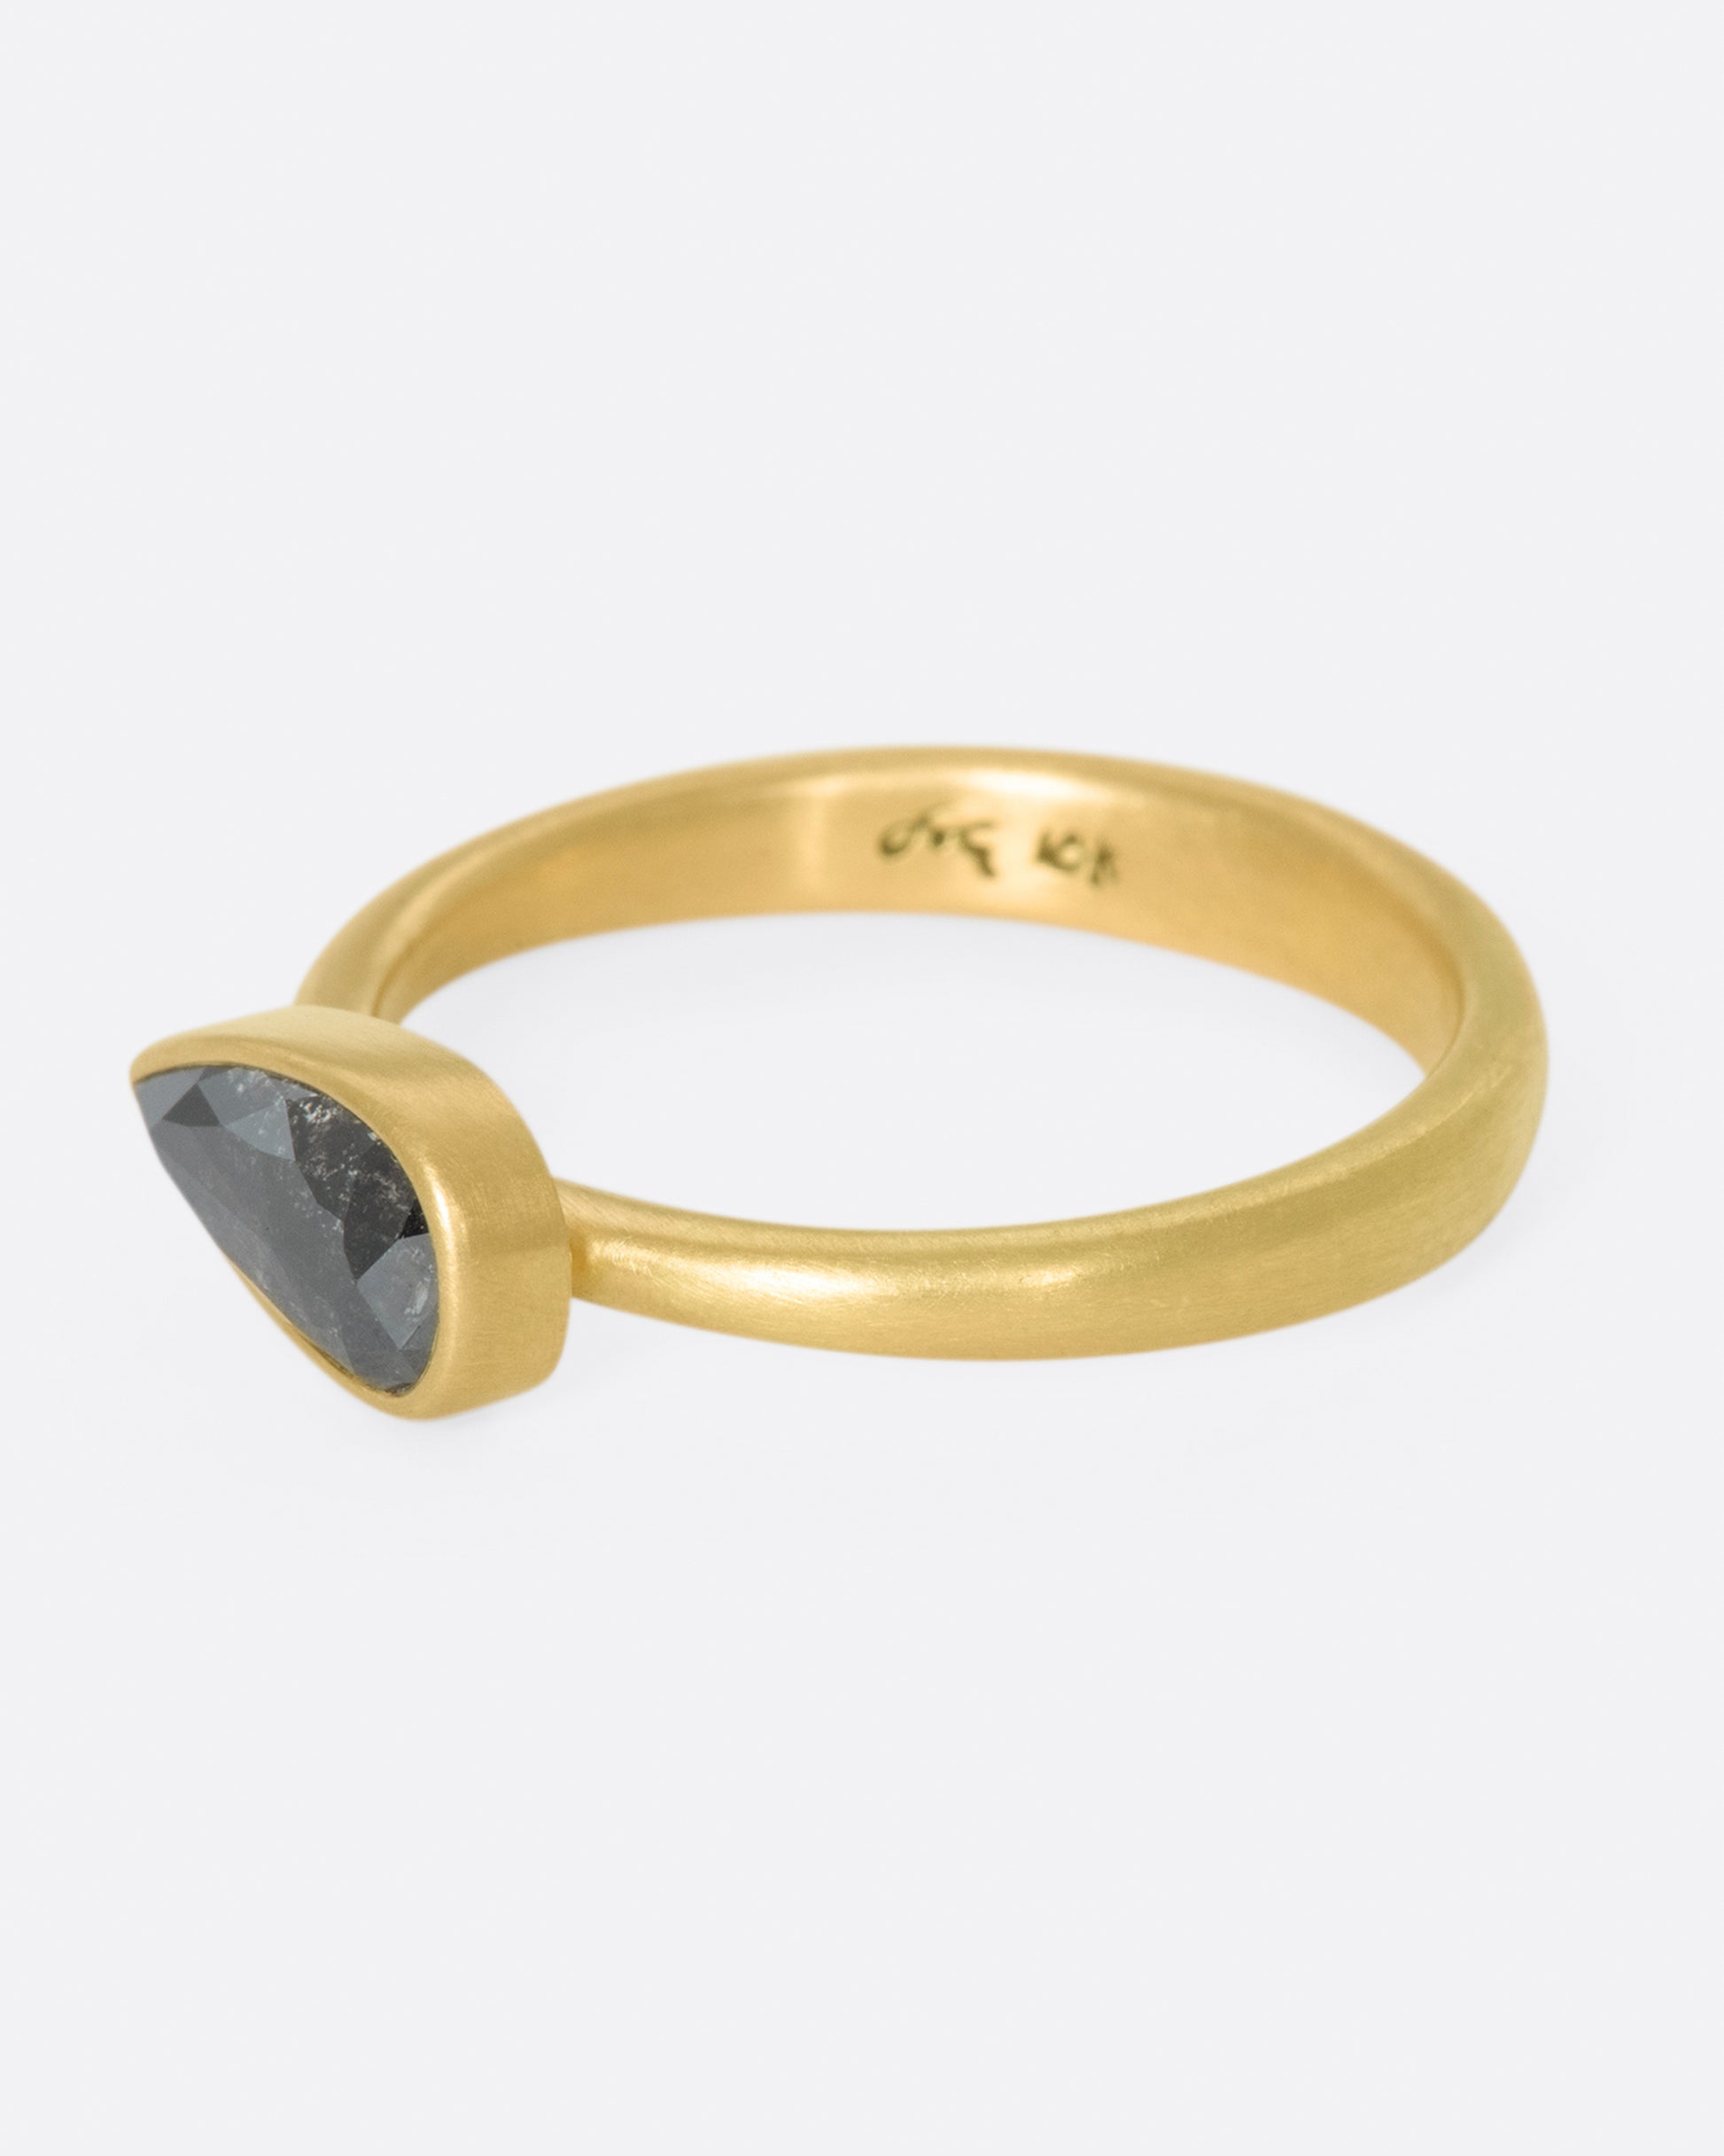 A solitaire ring with a dark, cloudy diamond set on its side